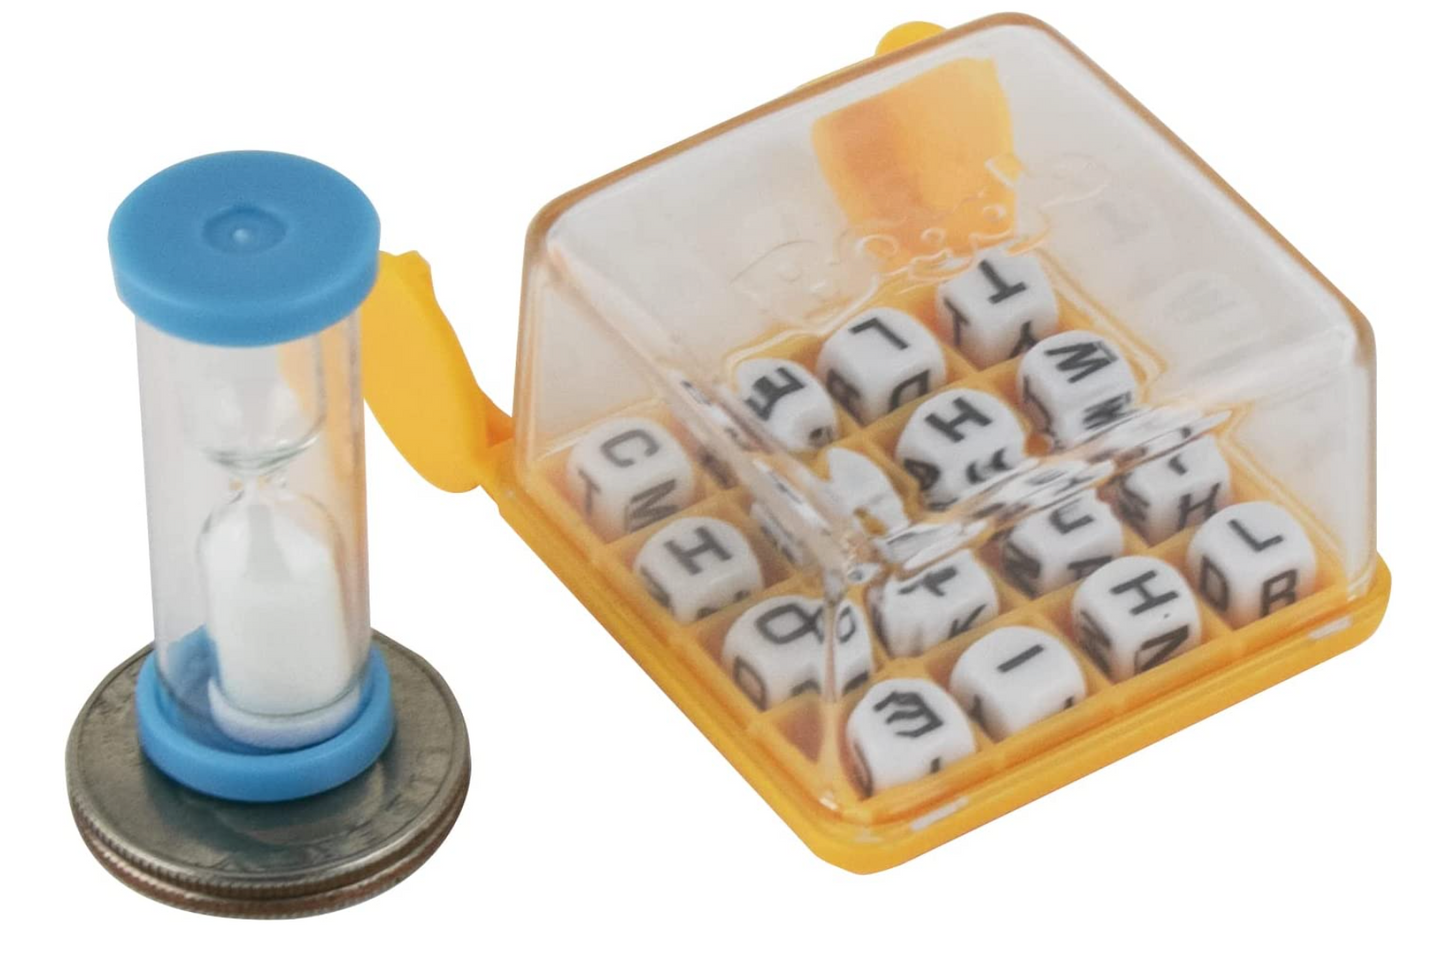 World's Smallest Boggle